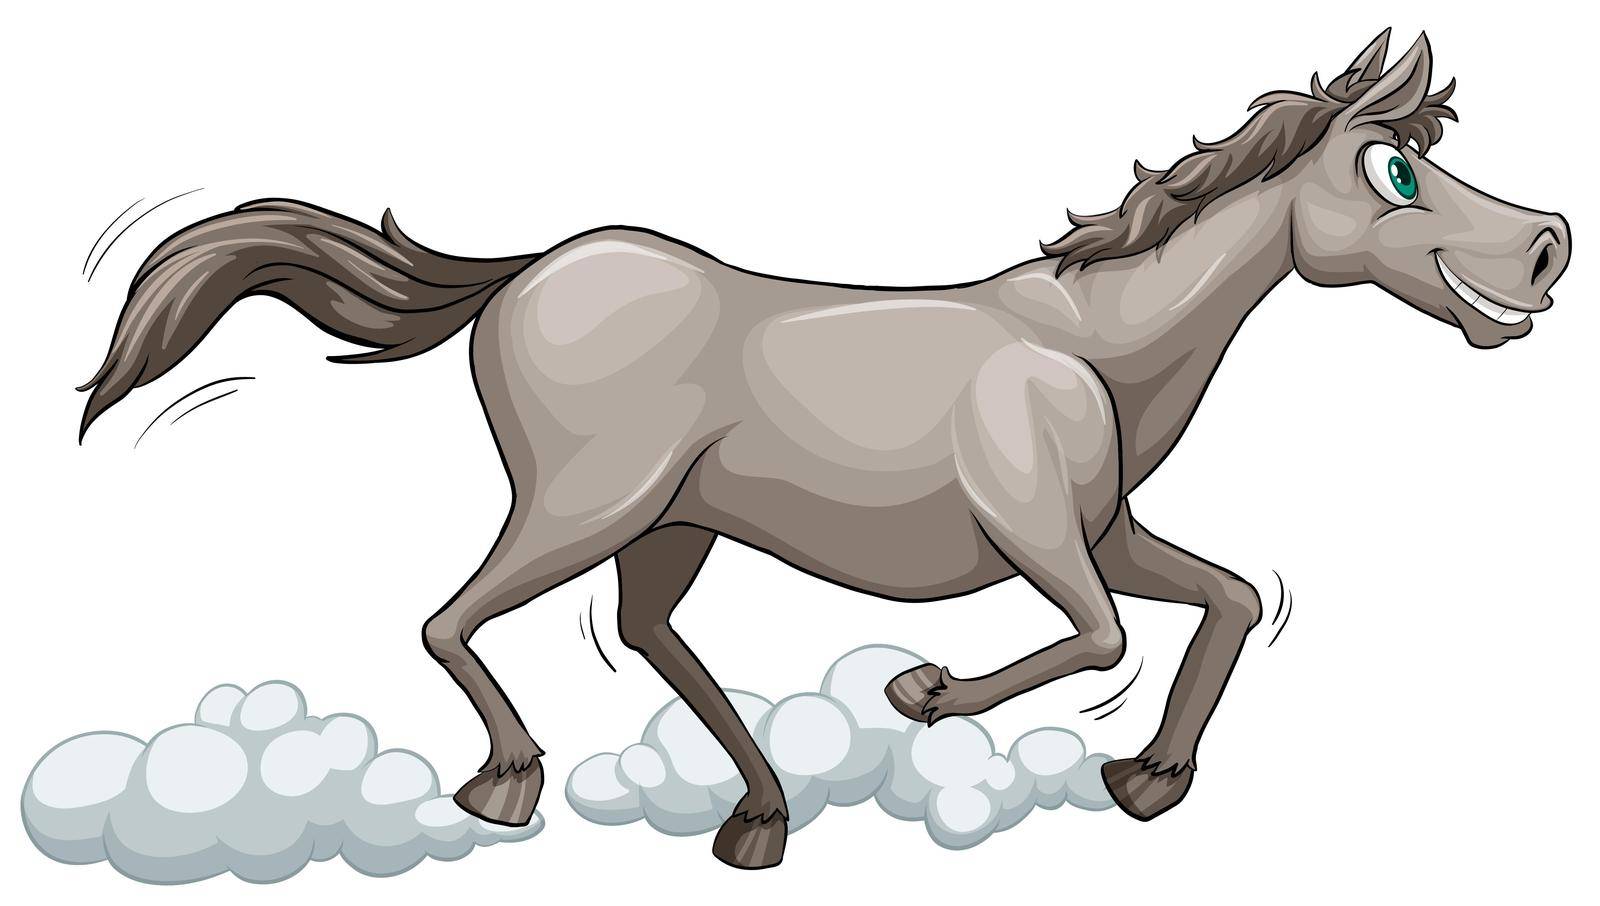 Grey horse running on a white background